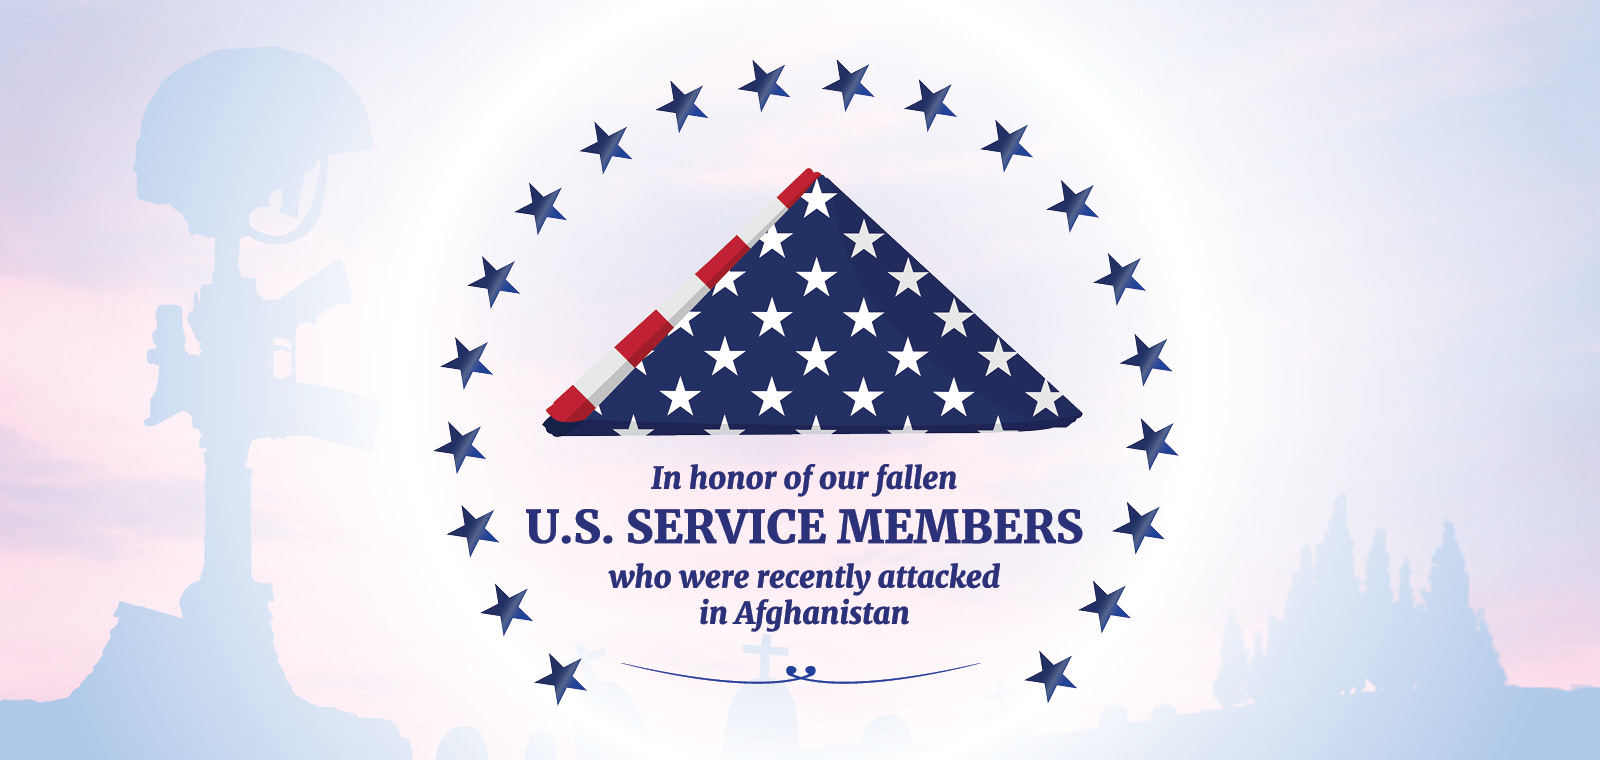 In honor of our fallen U.S. Service Members who were recently attacked in Afghanistan